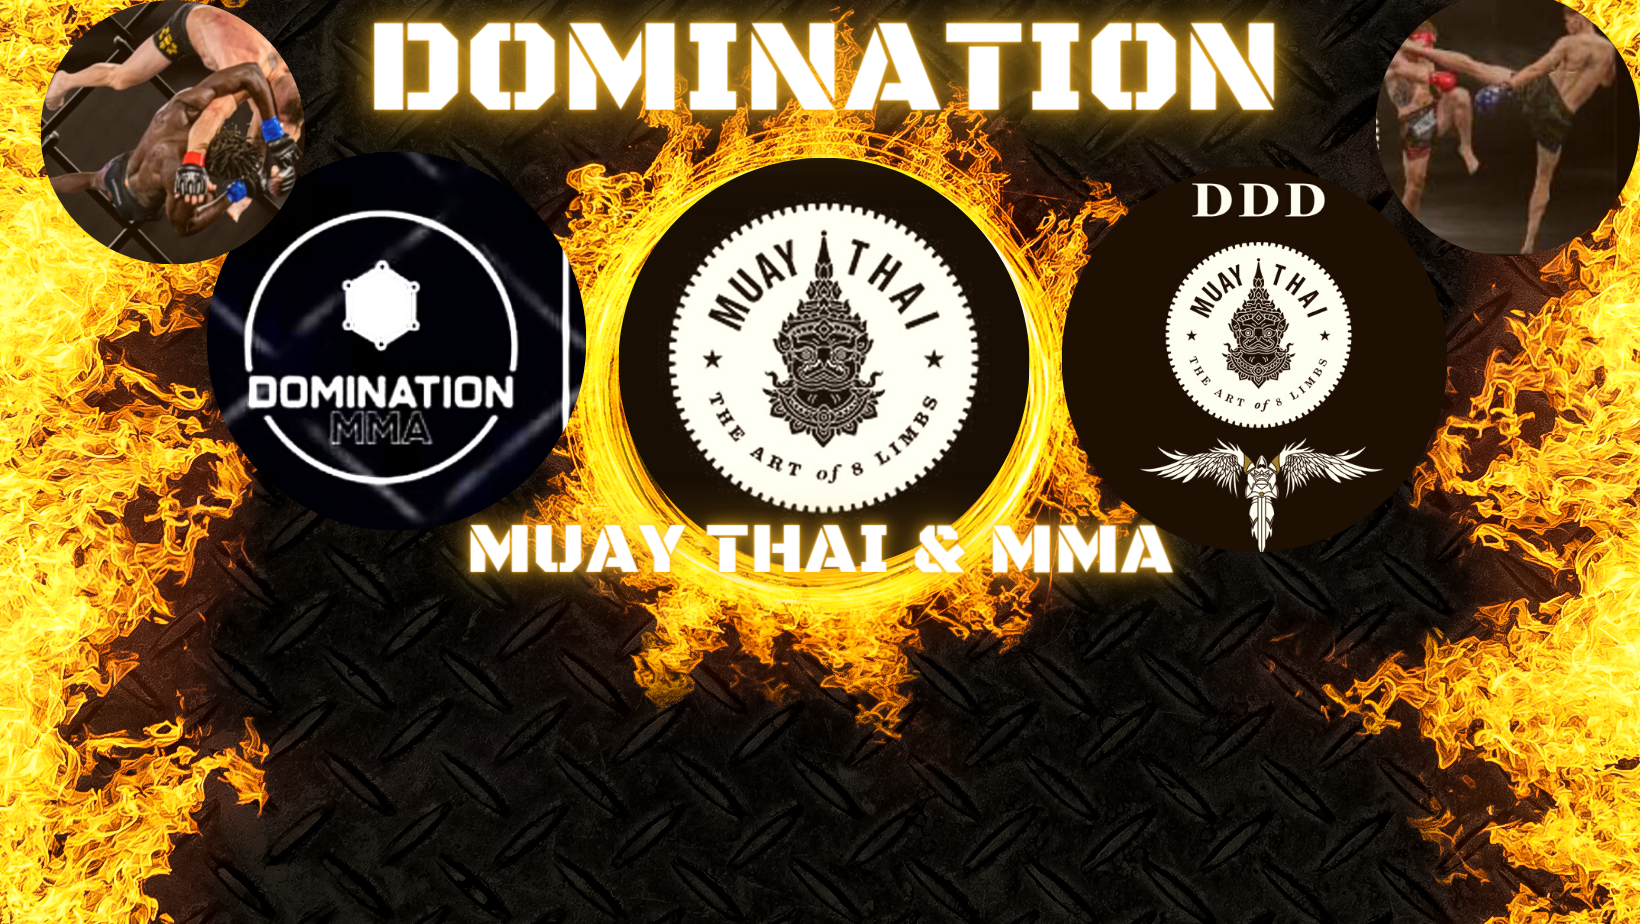 Poster advertising Domination Muay Thai and MMA , with images of sports people.